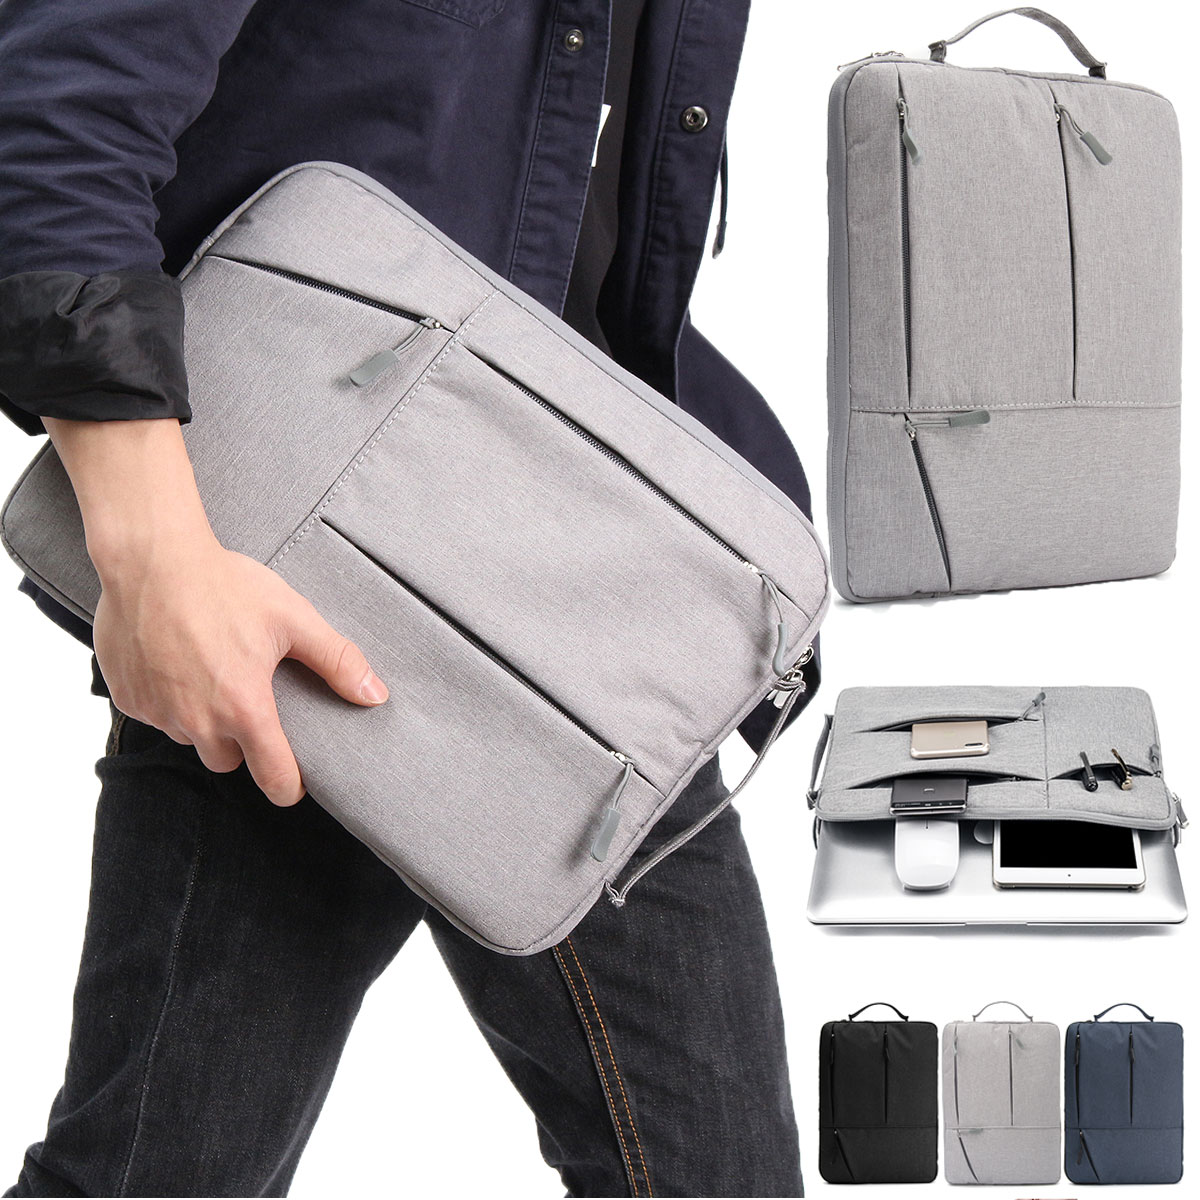 

13 Inch Portable Laptop Sleeve Oxford Bag Protective Case Notebook Backpack